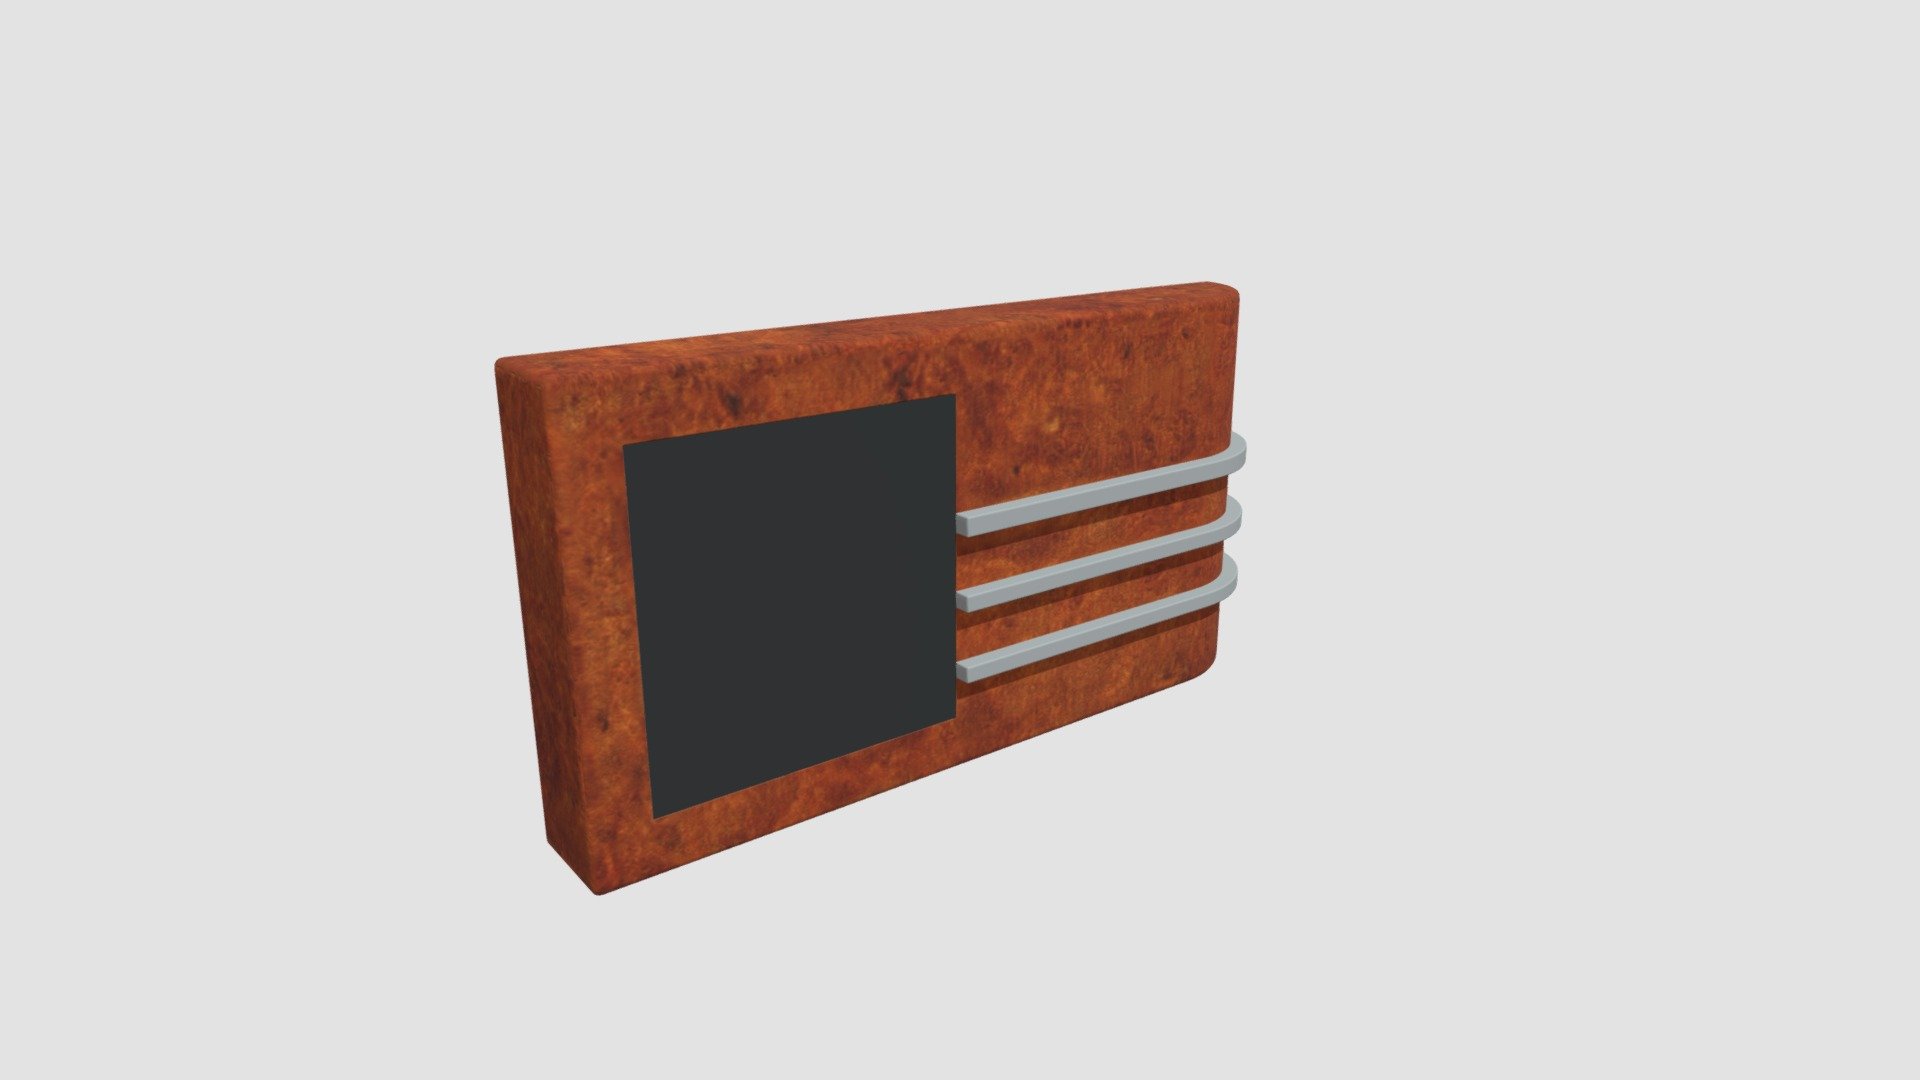 Highly detailed 3d model of radio with all textures, shaders and materials. It is ready to use, just put it into your scene 3d model